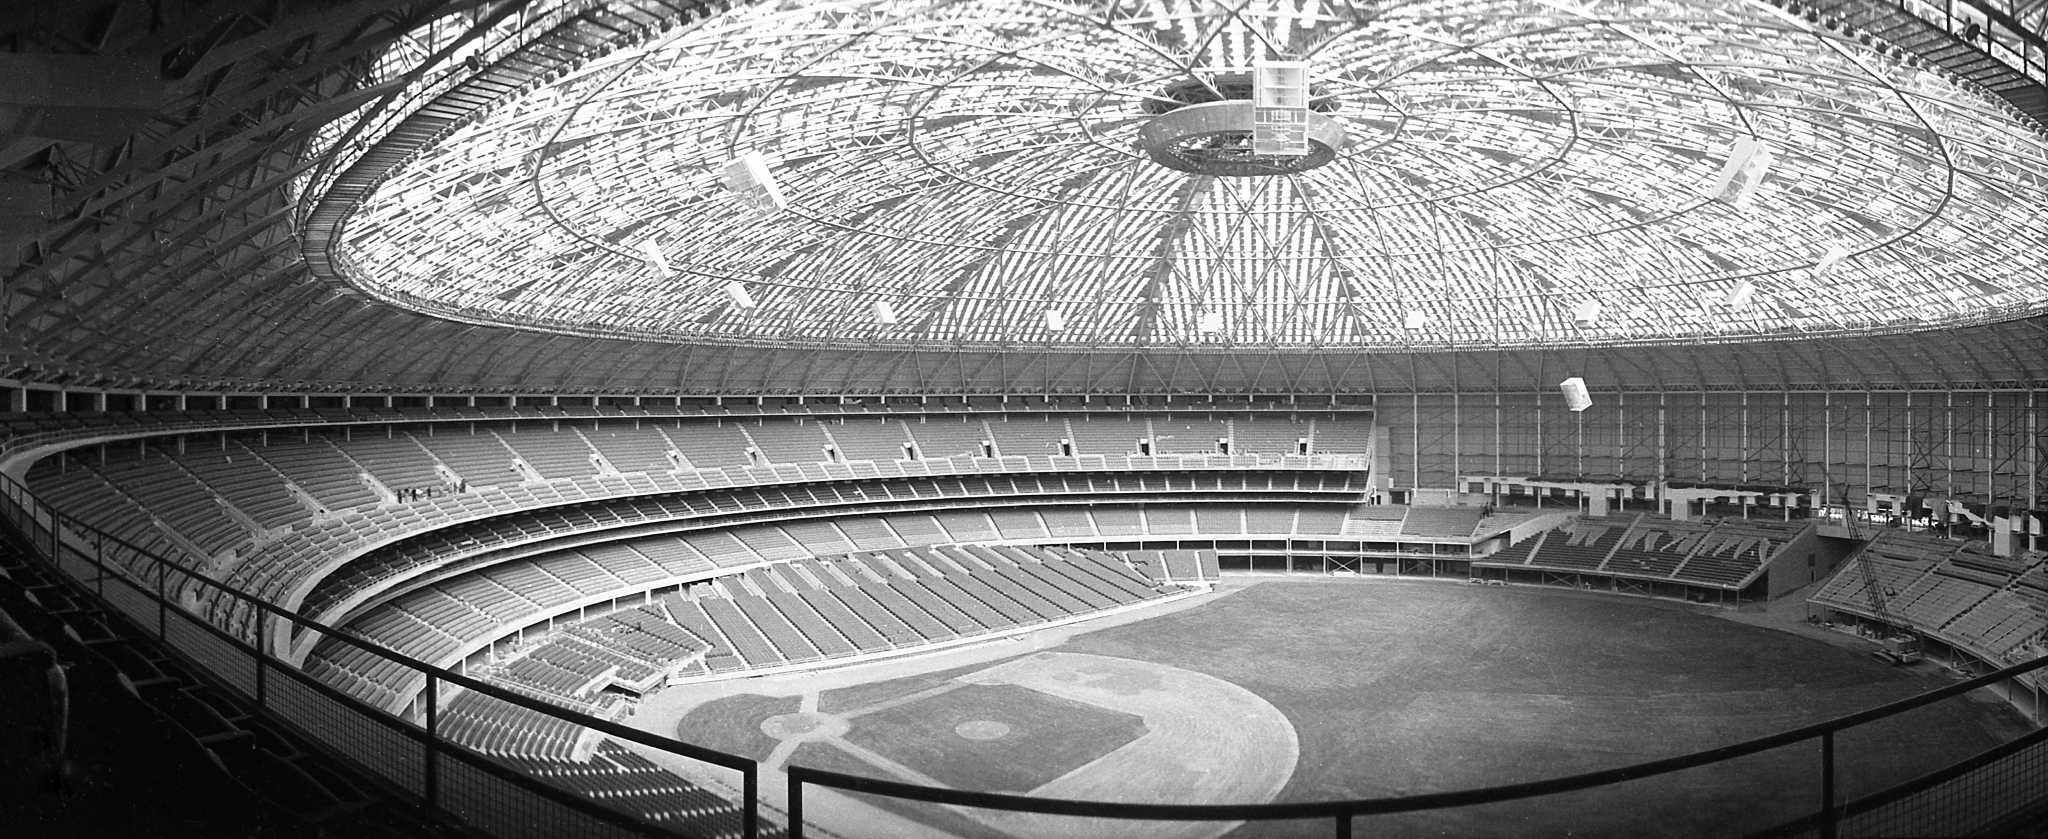 Astrodome - history, photos and more of the Houston Astros former ballpark